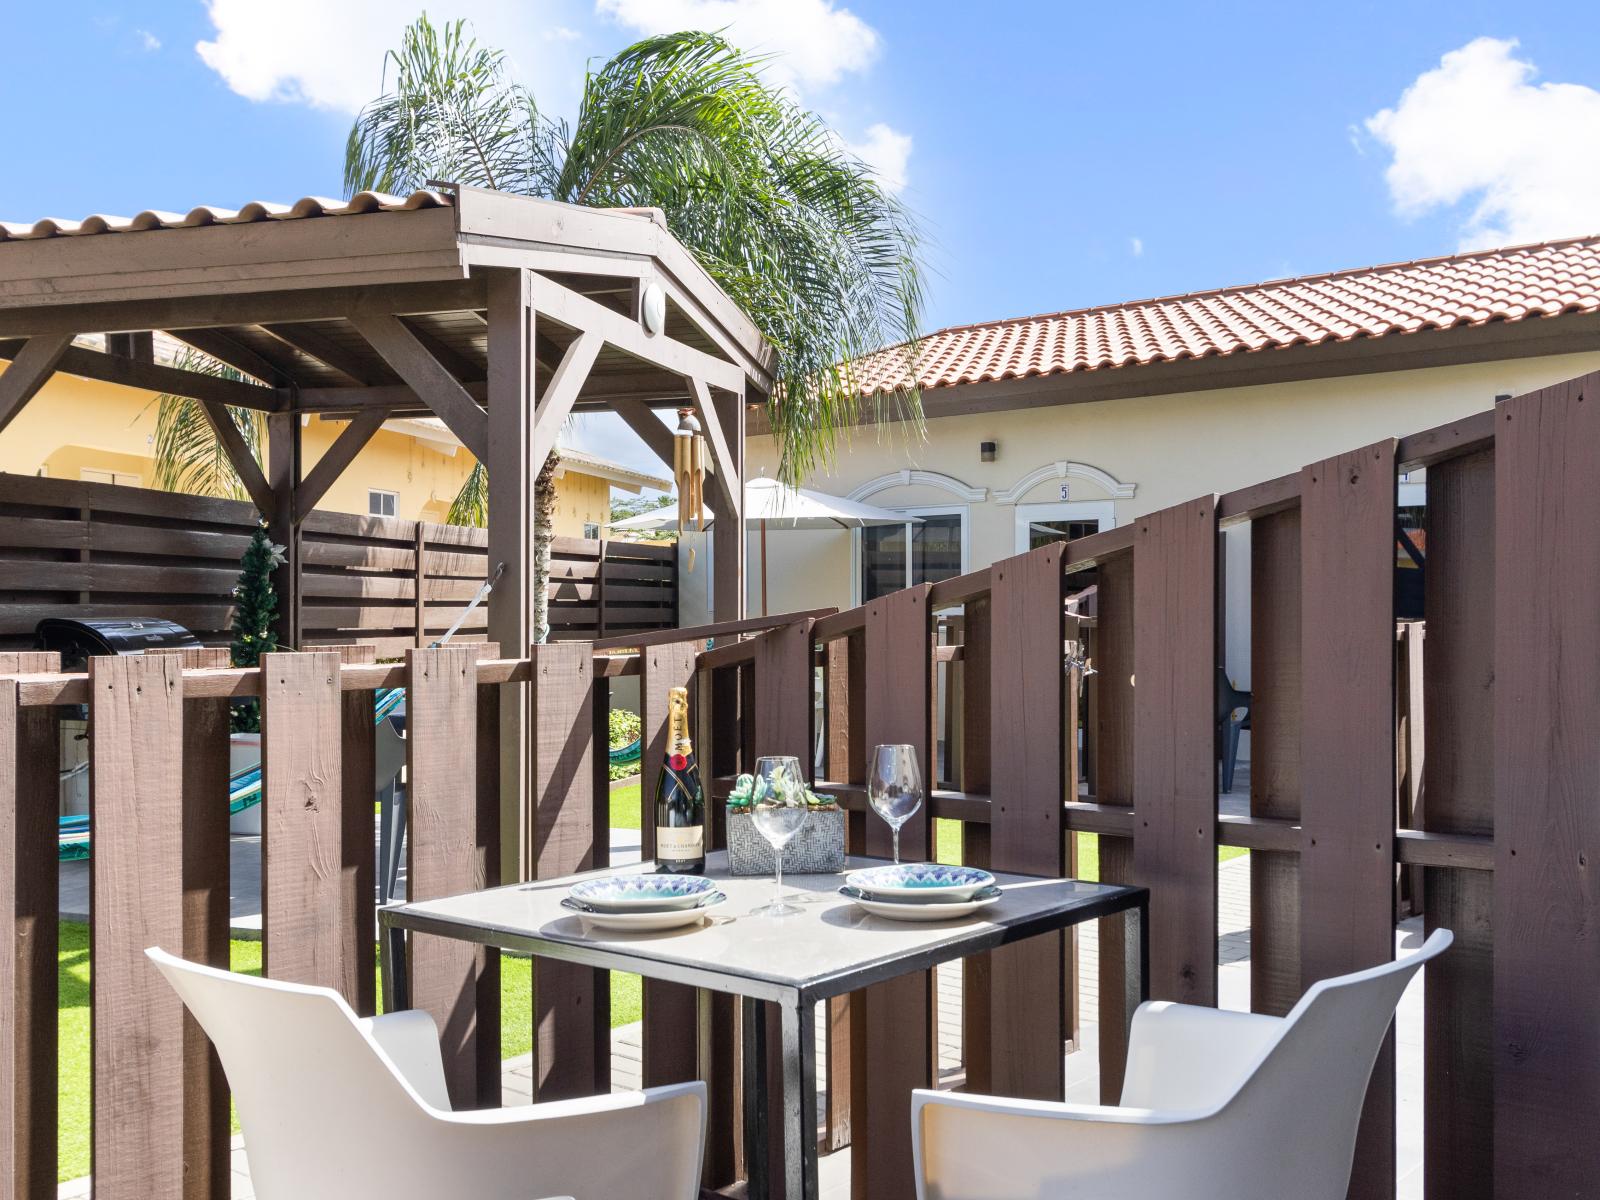 Elite outdoor dinning area of the apartment in Noord, Aruba - Beautiful 2 persons dinning - Majestically decored space with refreshing Atmosphere - Superbly sunbathed space - Outstanding pool facing dinning area - Beautiful views